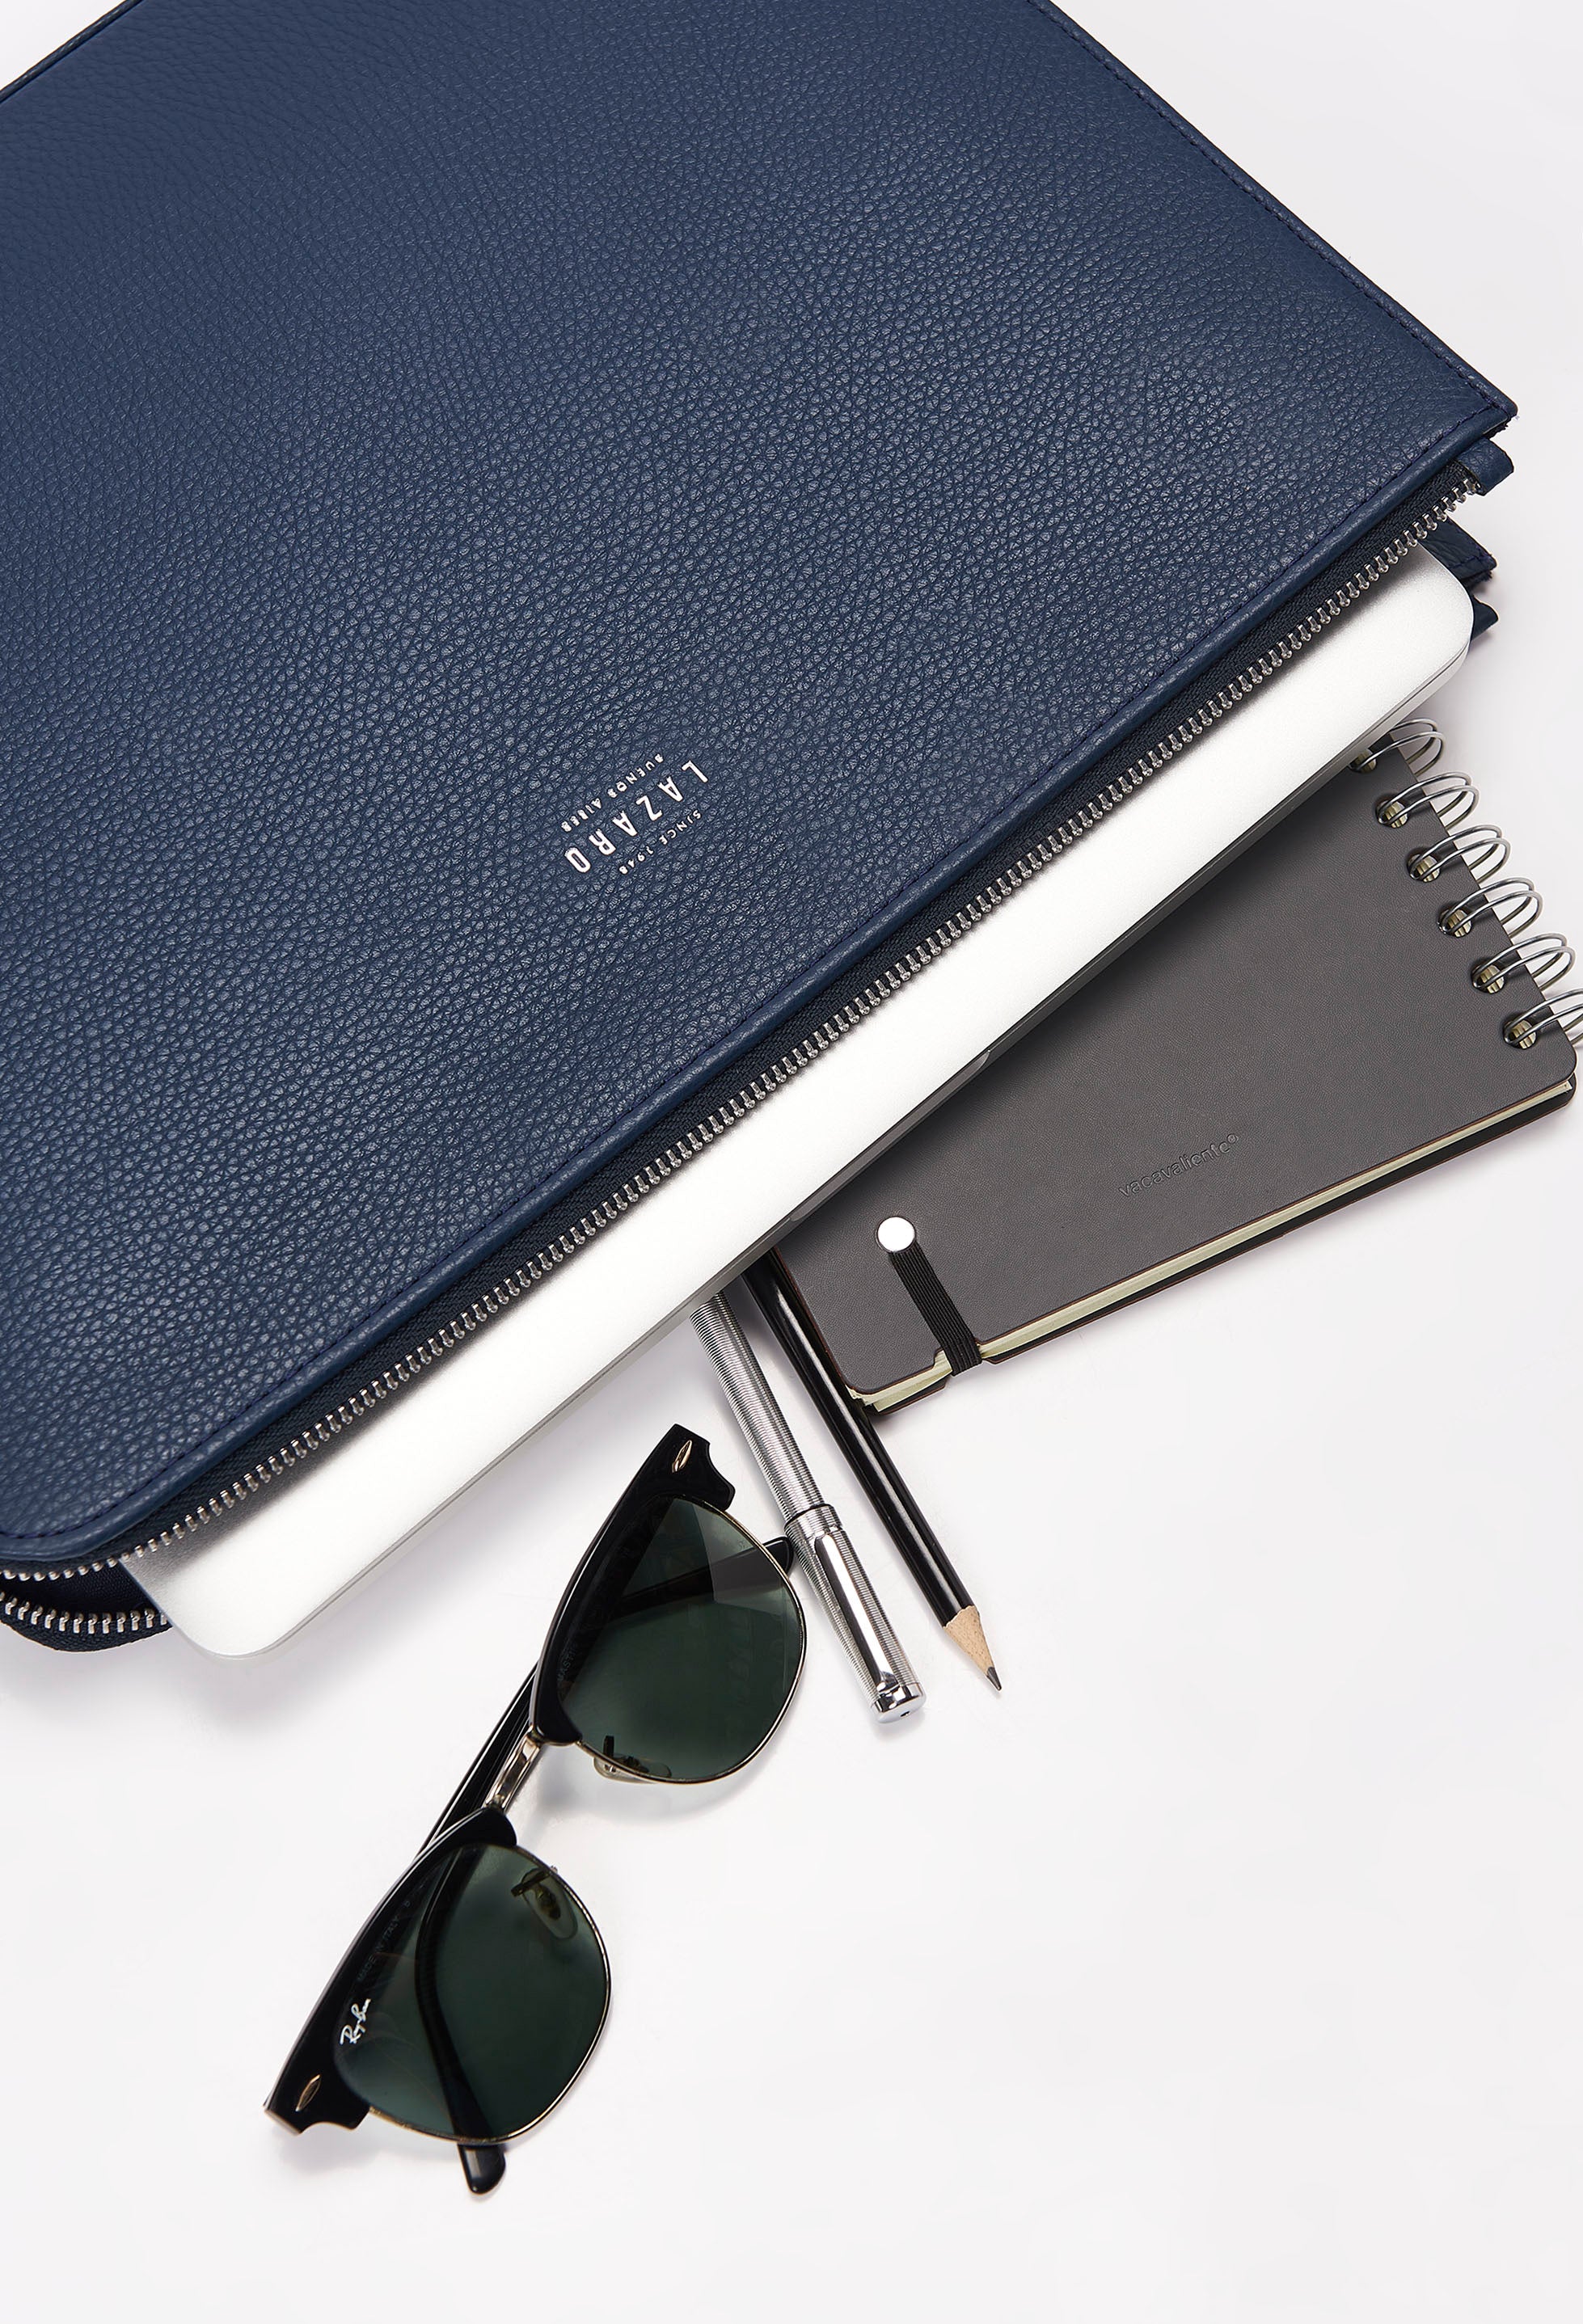 Partial photo of a Blue Leather Slim Computer Case that shows it can fit sunglasses, pencils and pens, notebooks and a computer.